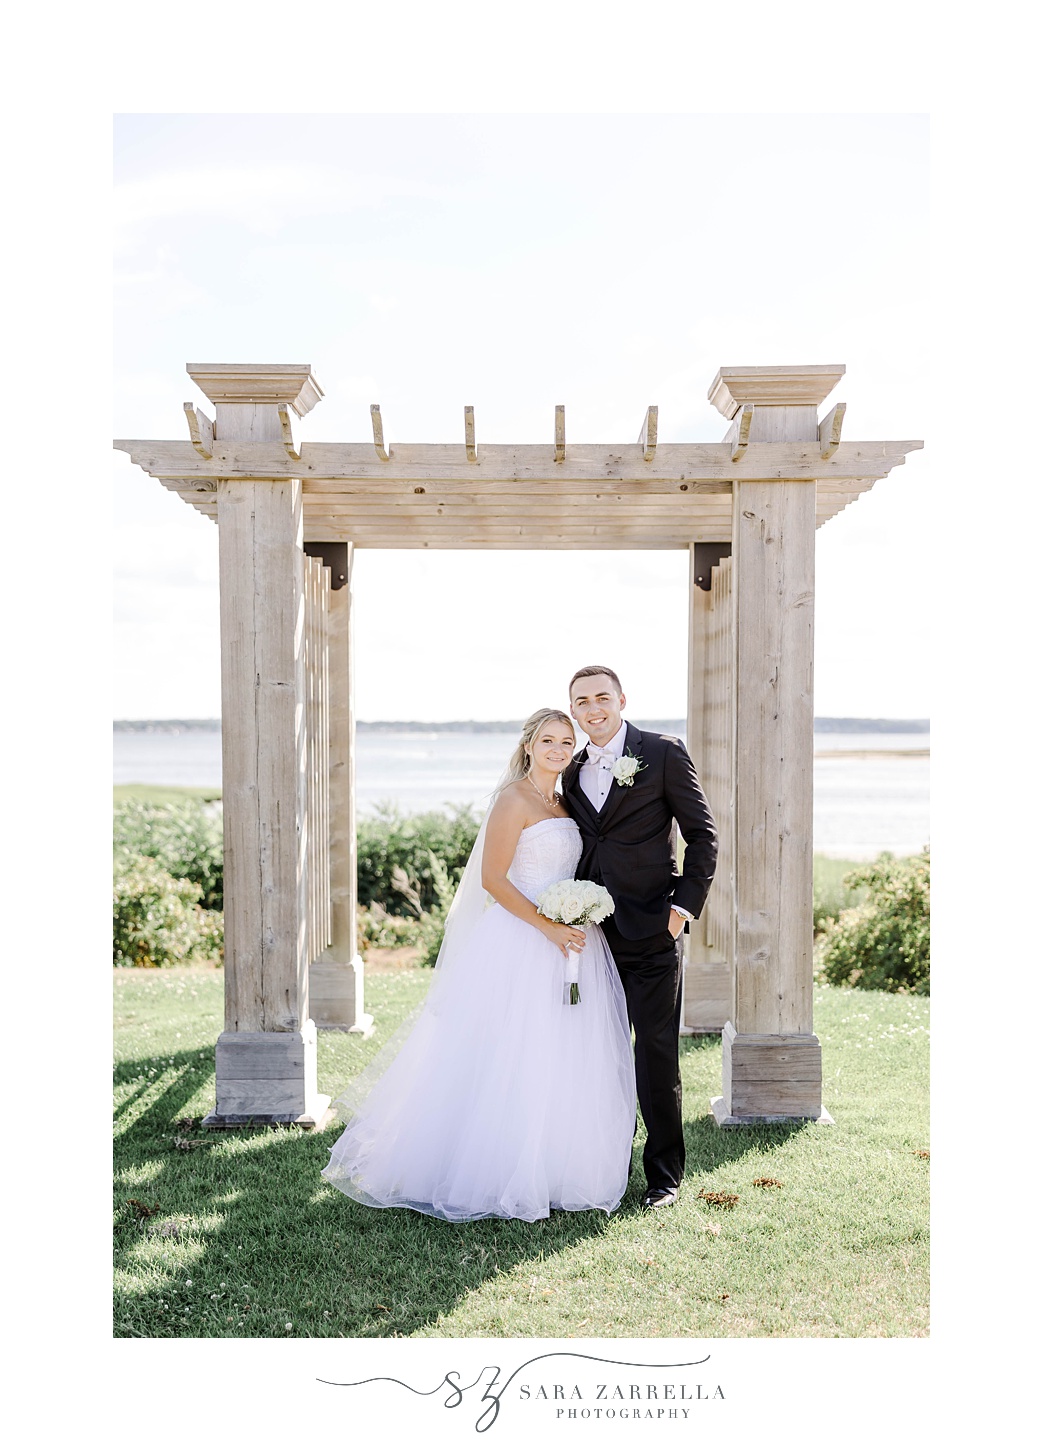 newlyweds pose by stone arbor at Harbor Lights